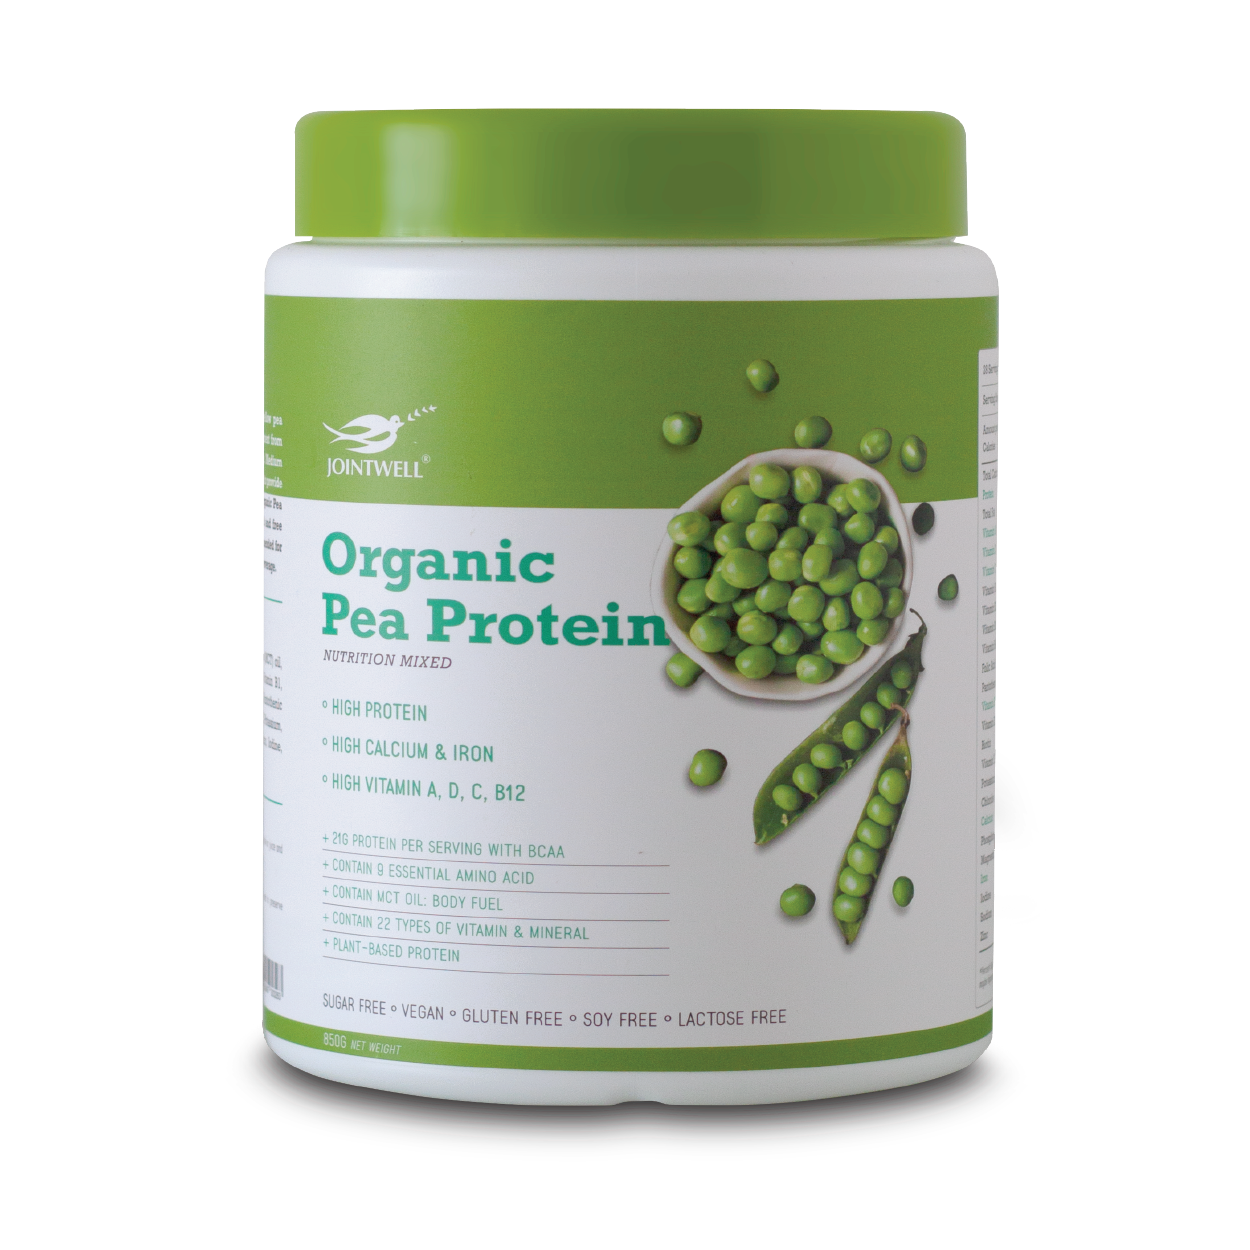 Organic Pea Protein - Jointwell Marketing